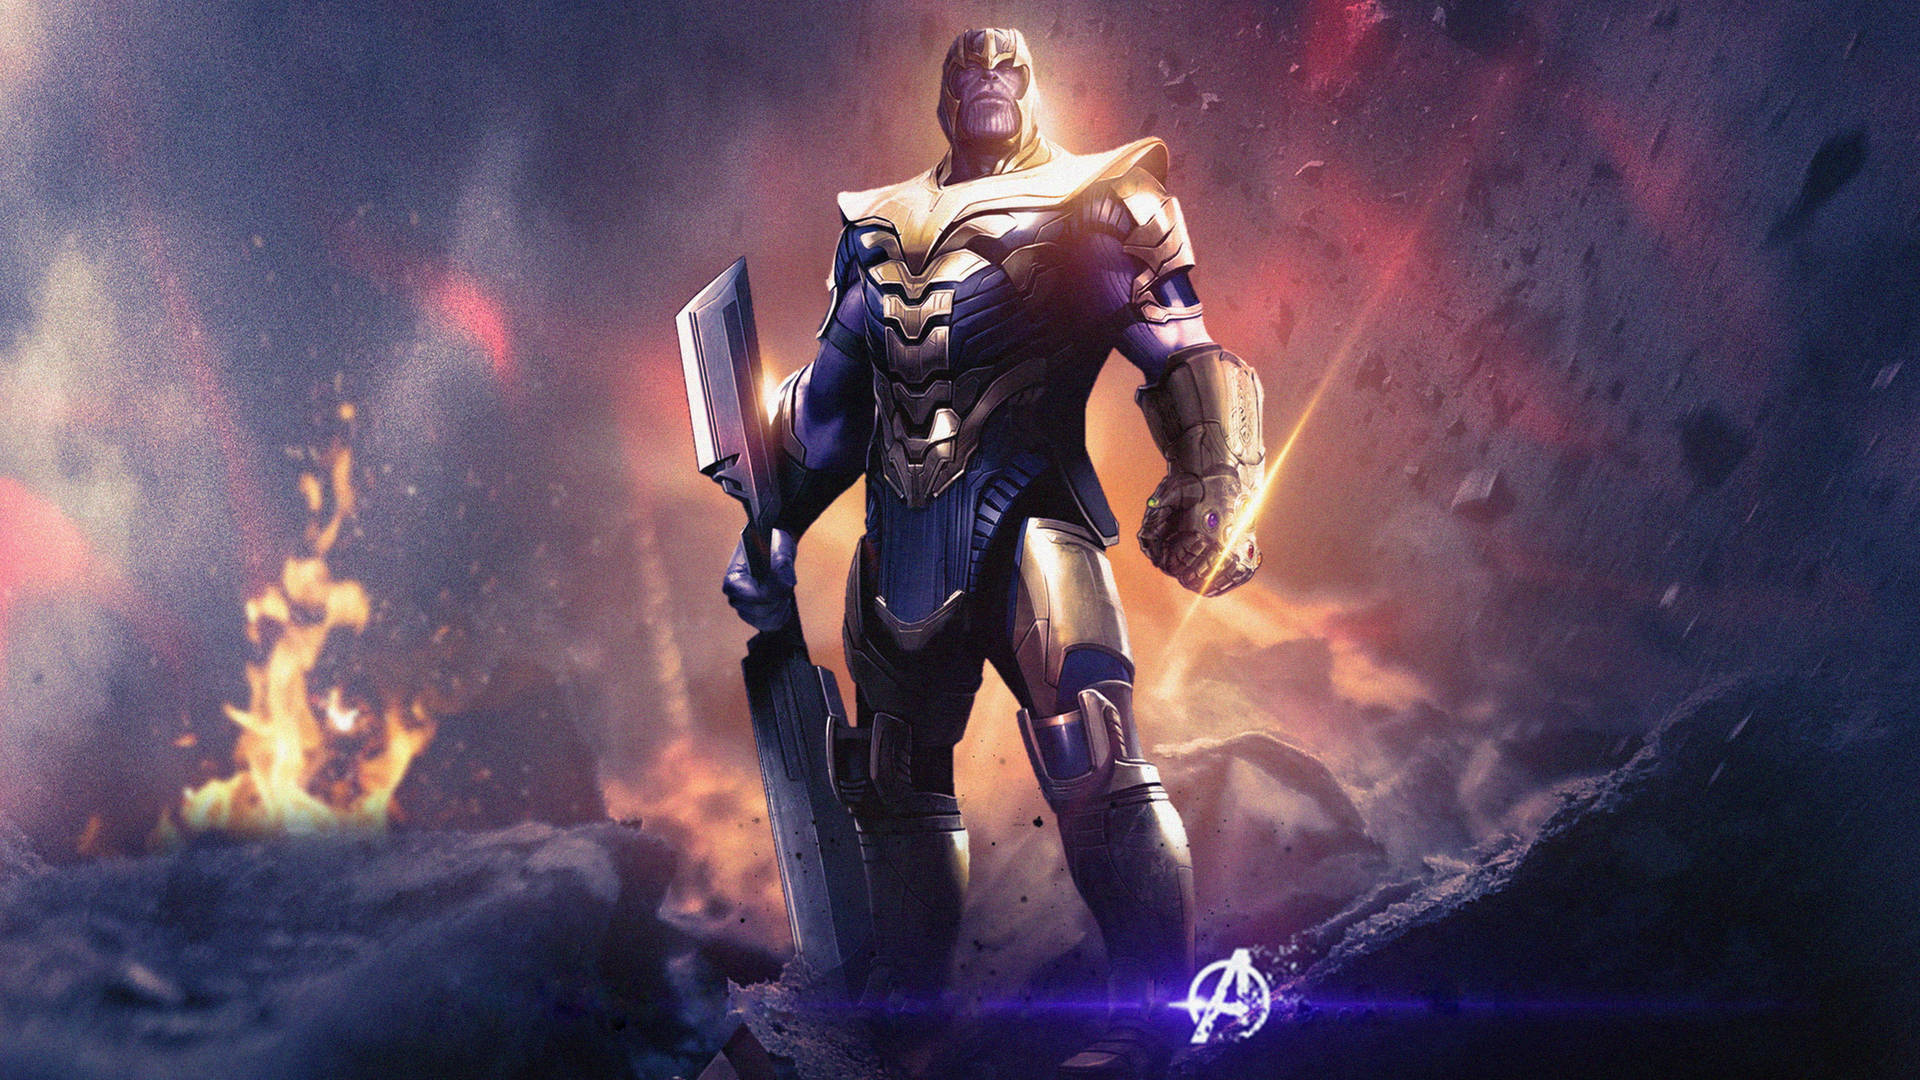 Double-bladed Sword Thanos Hd Wallpaper